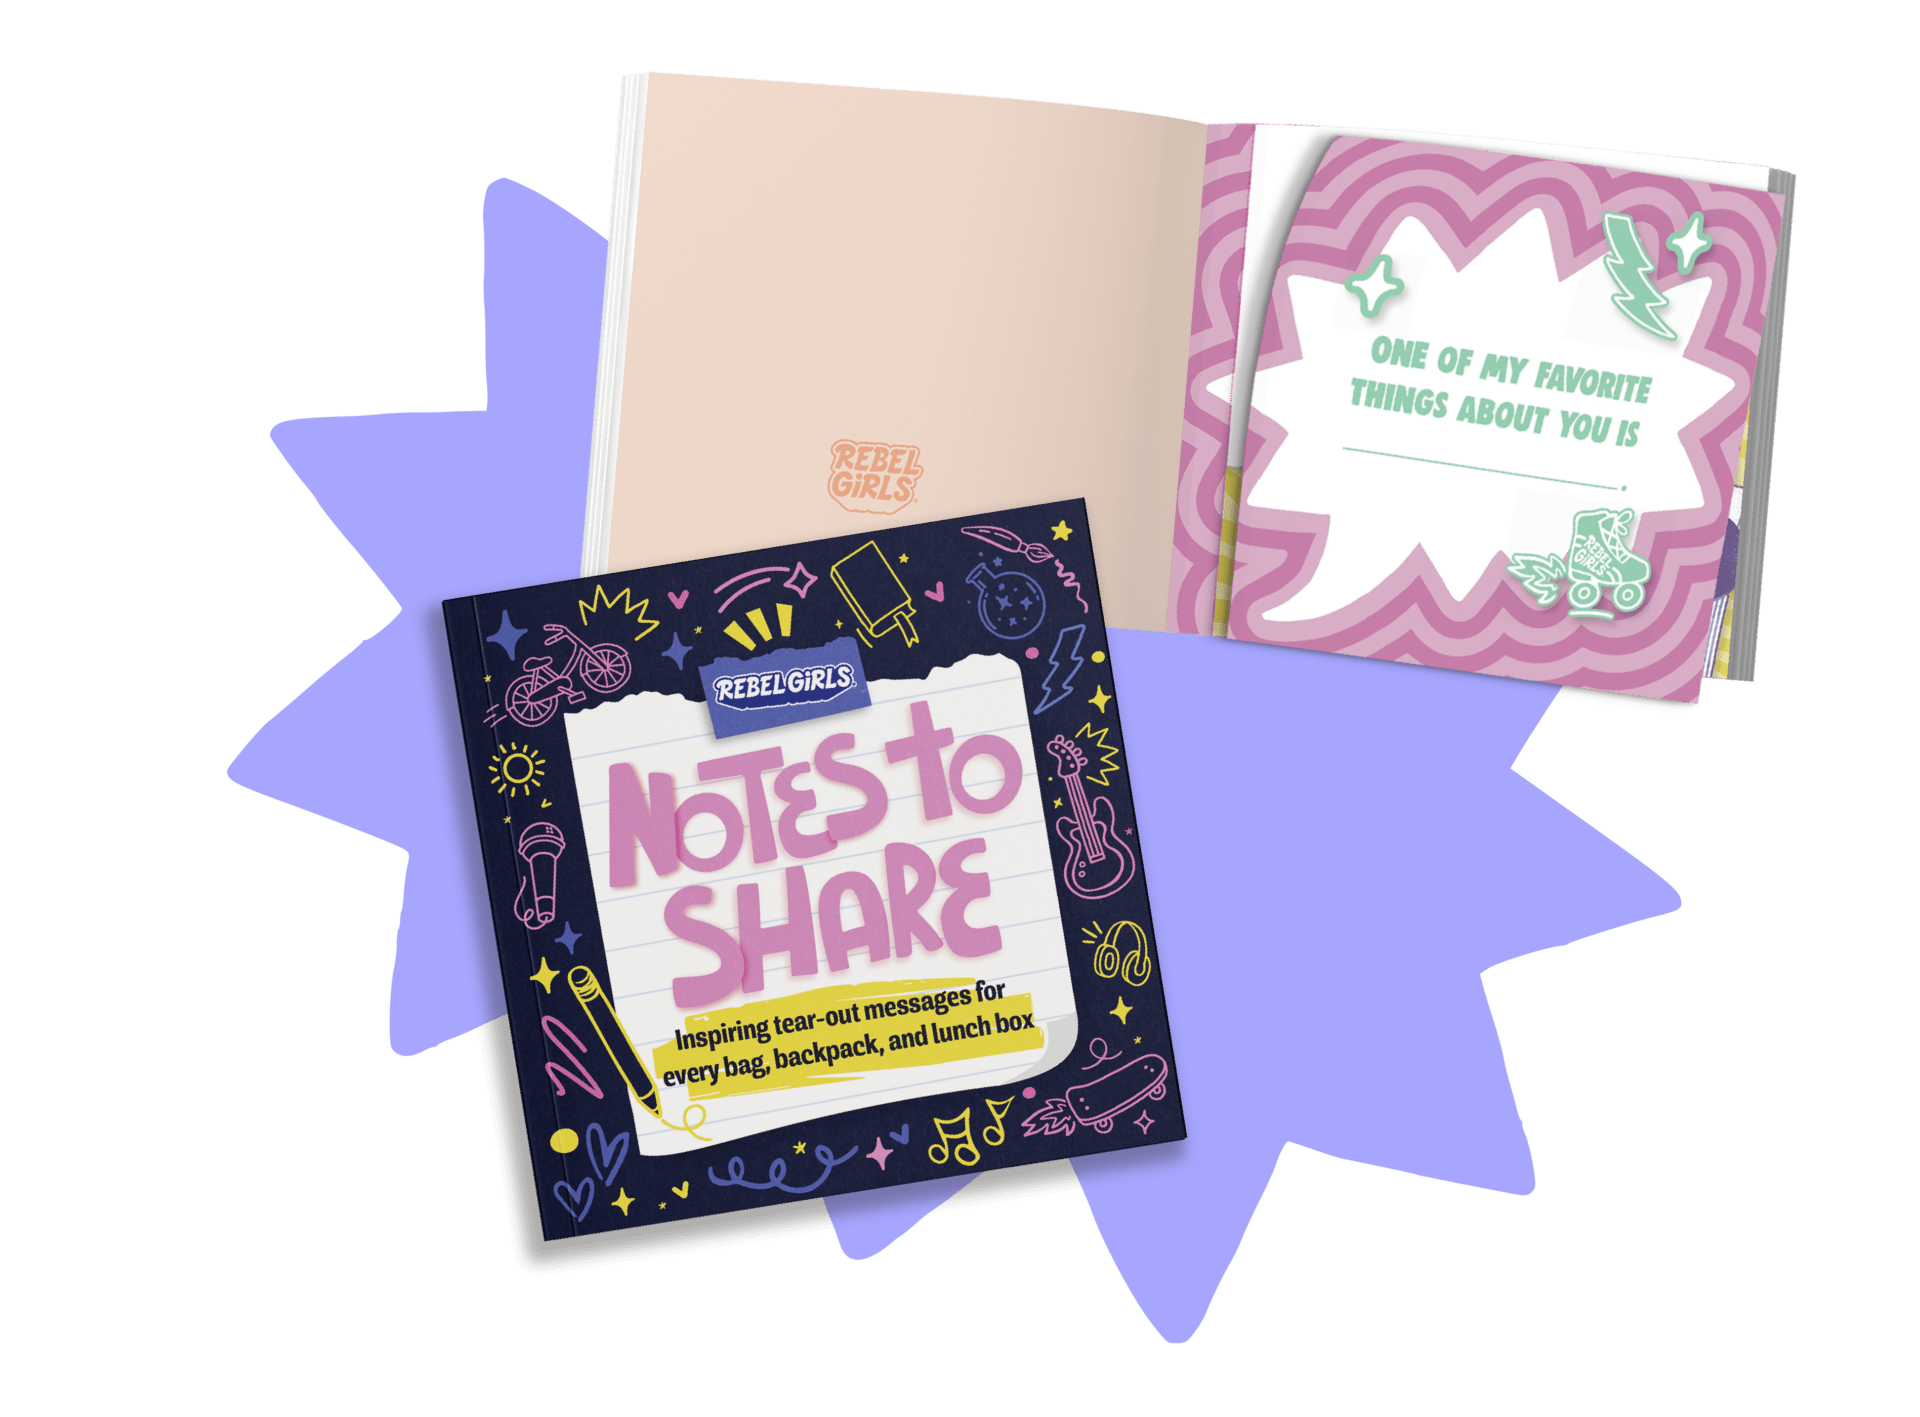 <p><span data-sheets-value="{&quot;1&quot;:2,&quot;2&quot;:&quot;Here's a great way to brighten your child's day: slip an empowering note into their lunch box, backpack, or sports bag.\n\nWith Notes to Share, the team behind the New York Times best-selling series Good Night Stories for Rebel Girls provides you with 180+ inspiring notes to make your little Rebel smile. Packed with quotations, affirmations, jokes, and mood-boosting interactive notes, this collection of tear-out messages is a simple way to encourage and uplift your child at school, camp, STEM club, sports practice, or dance class.\n\n&quot;}" data-sheets-userformat="{&quot;2&quot;:13187,&quot;3&quot;:{&quot;1&quot;:0},&quot;4&quot;:{&quot;1&quot;:3,&quot;3&quot;:2},&quot;10&quot;:1,&quot;11&quot;:4,&quot;12&quot;:0,&quot;15&quot;:&quot;Arial&quot;,&quot;16&quot;:12}" data-sheets-textstyleruns="{&quot;1&quot;:0}{&quot;1&quot;:126,&quot;2&quot;:{&quot;6&quot;:1}}{&quot;1&quot;:140}">Here&#8217;s a great way to brighten your child&#8217;s day: slip an empowering note into their lunch box, backpack, or sports bag.</p>
<p>With Notes to Share, the team behind the New York Times best-selling series Good Night Stories for Rebel Girls provides you with 180+ inspiring notes to make your little Rebel smile. Packed with quotations, affirmations, jokes, and mood-boosting interactive notes, this collection of tear-out messages is a simple way to encourage and uplift your child at school, camp, STEM club, sports practice, or dance class.<br />
</span></p>
